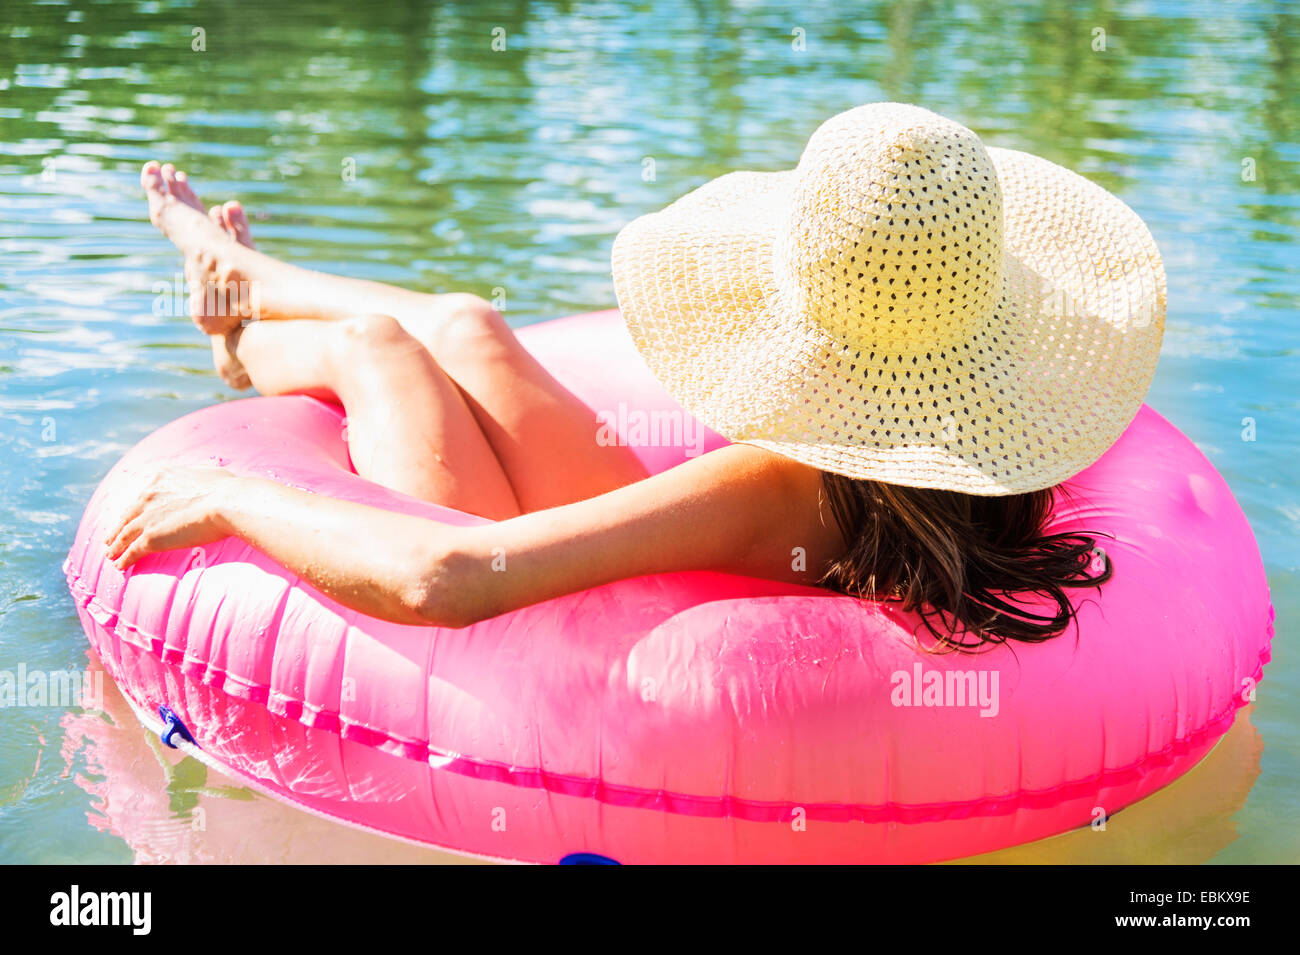 Rear view of young woman wearing sun hat floating on swim ring Stock Photo